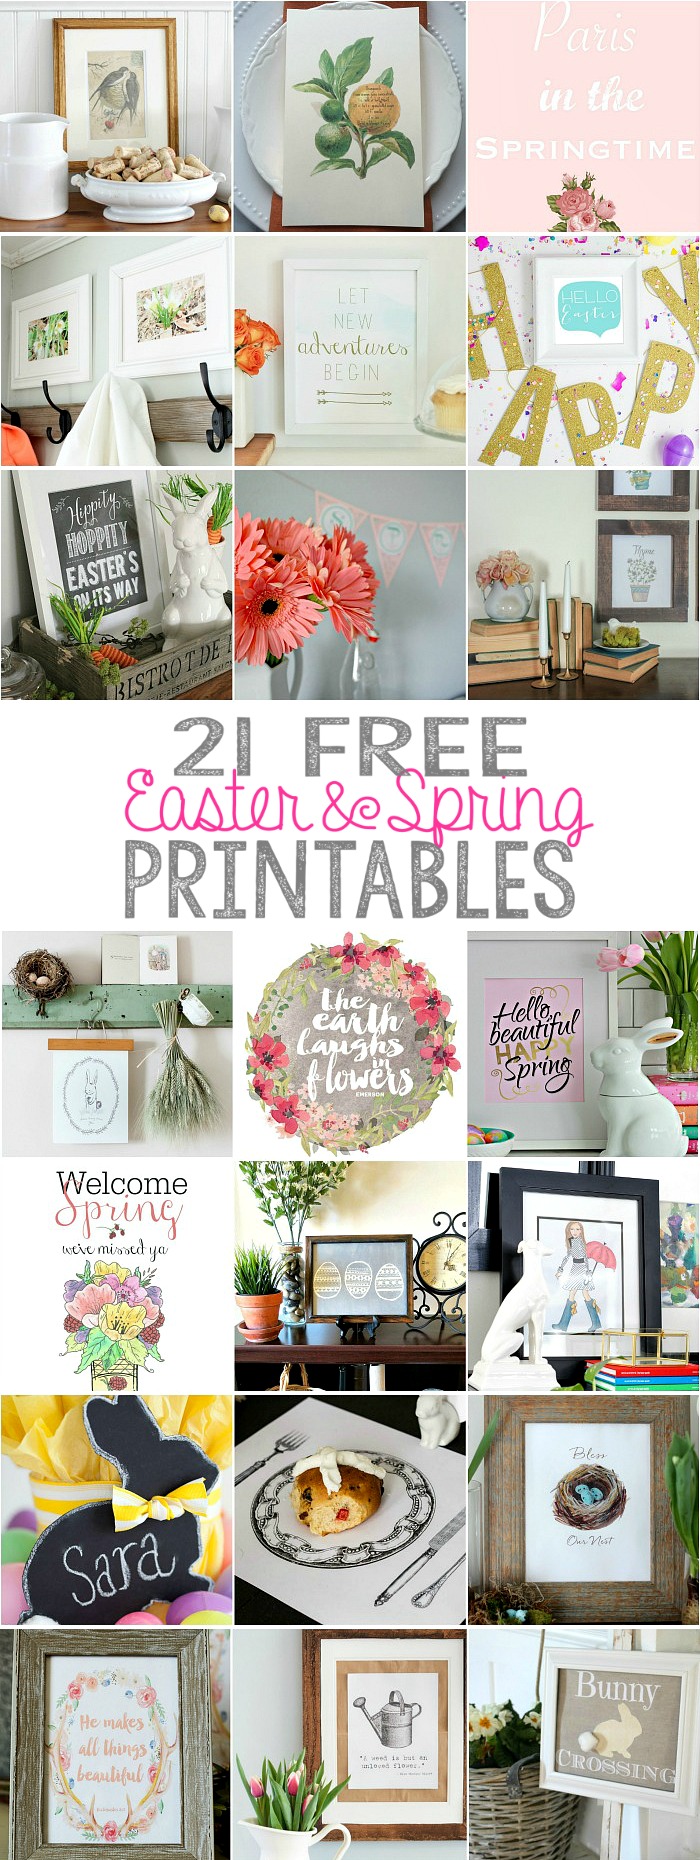 21 free Easter and Spring Printables